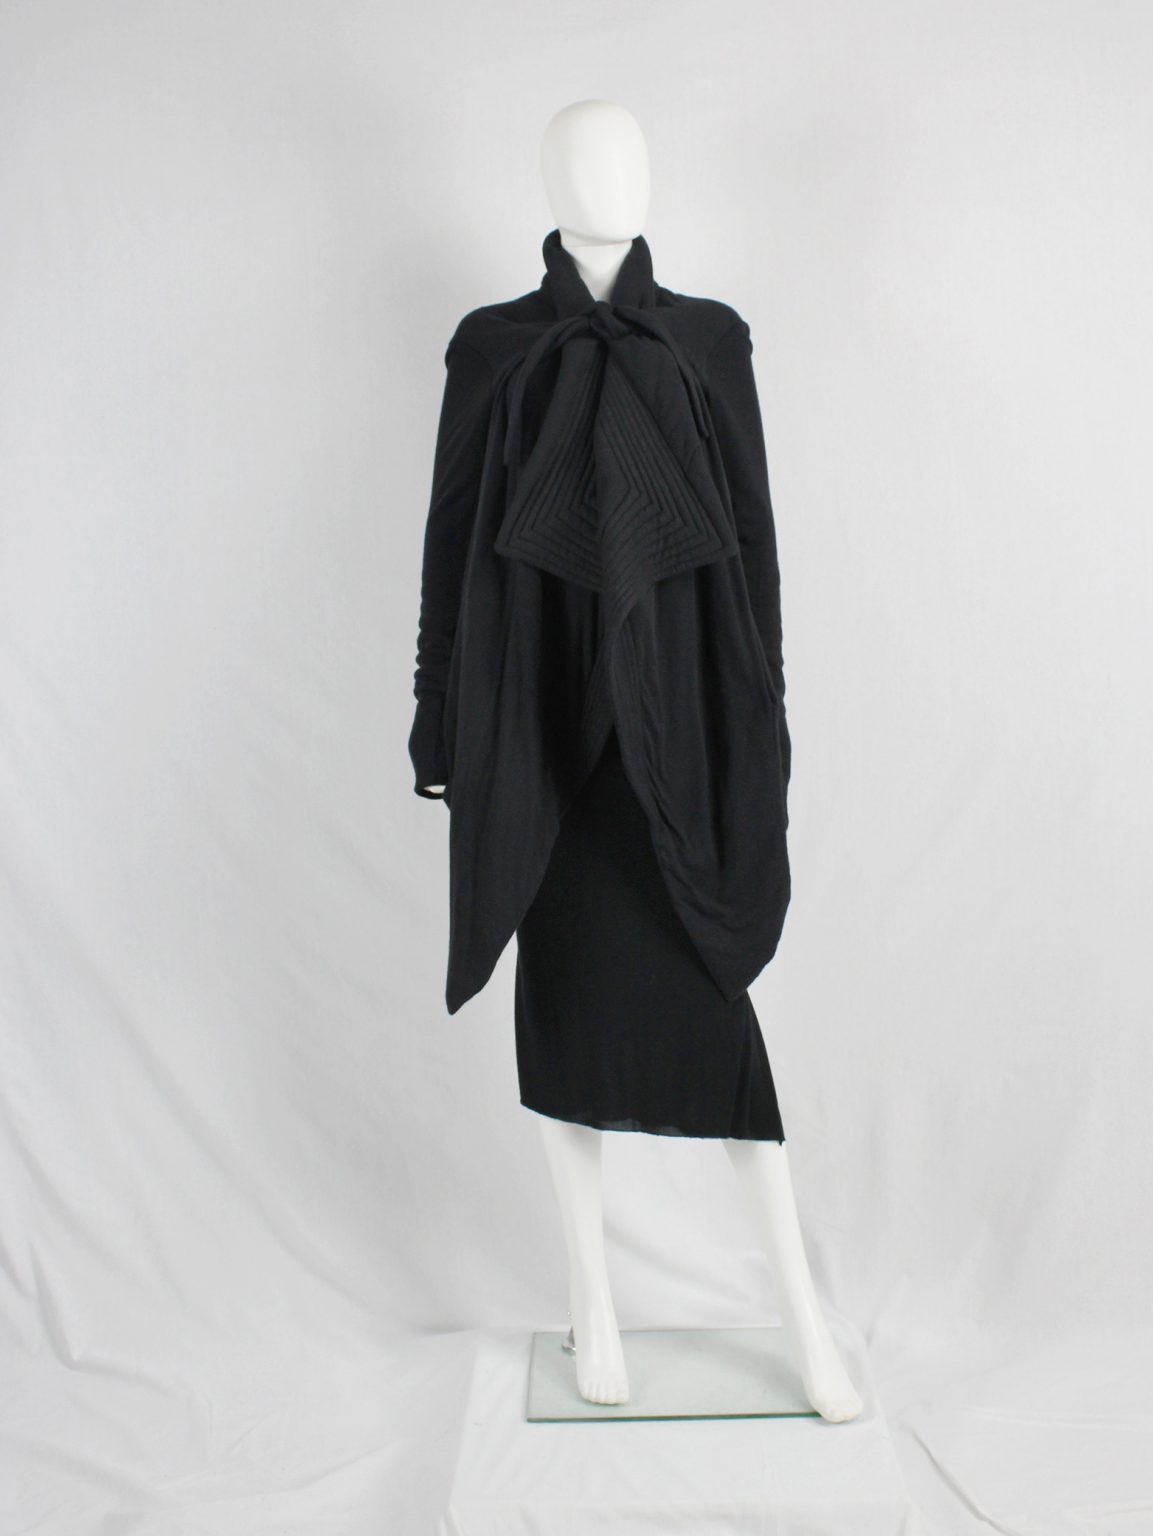 Rick Owens lilies black draped coat with tie front and triangular stitched panels